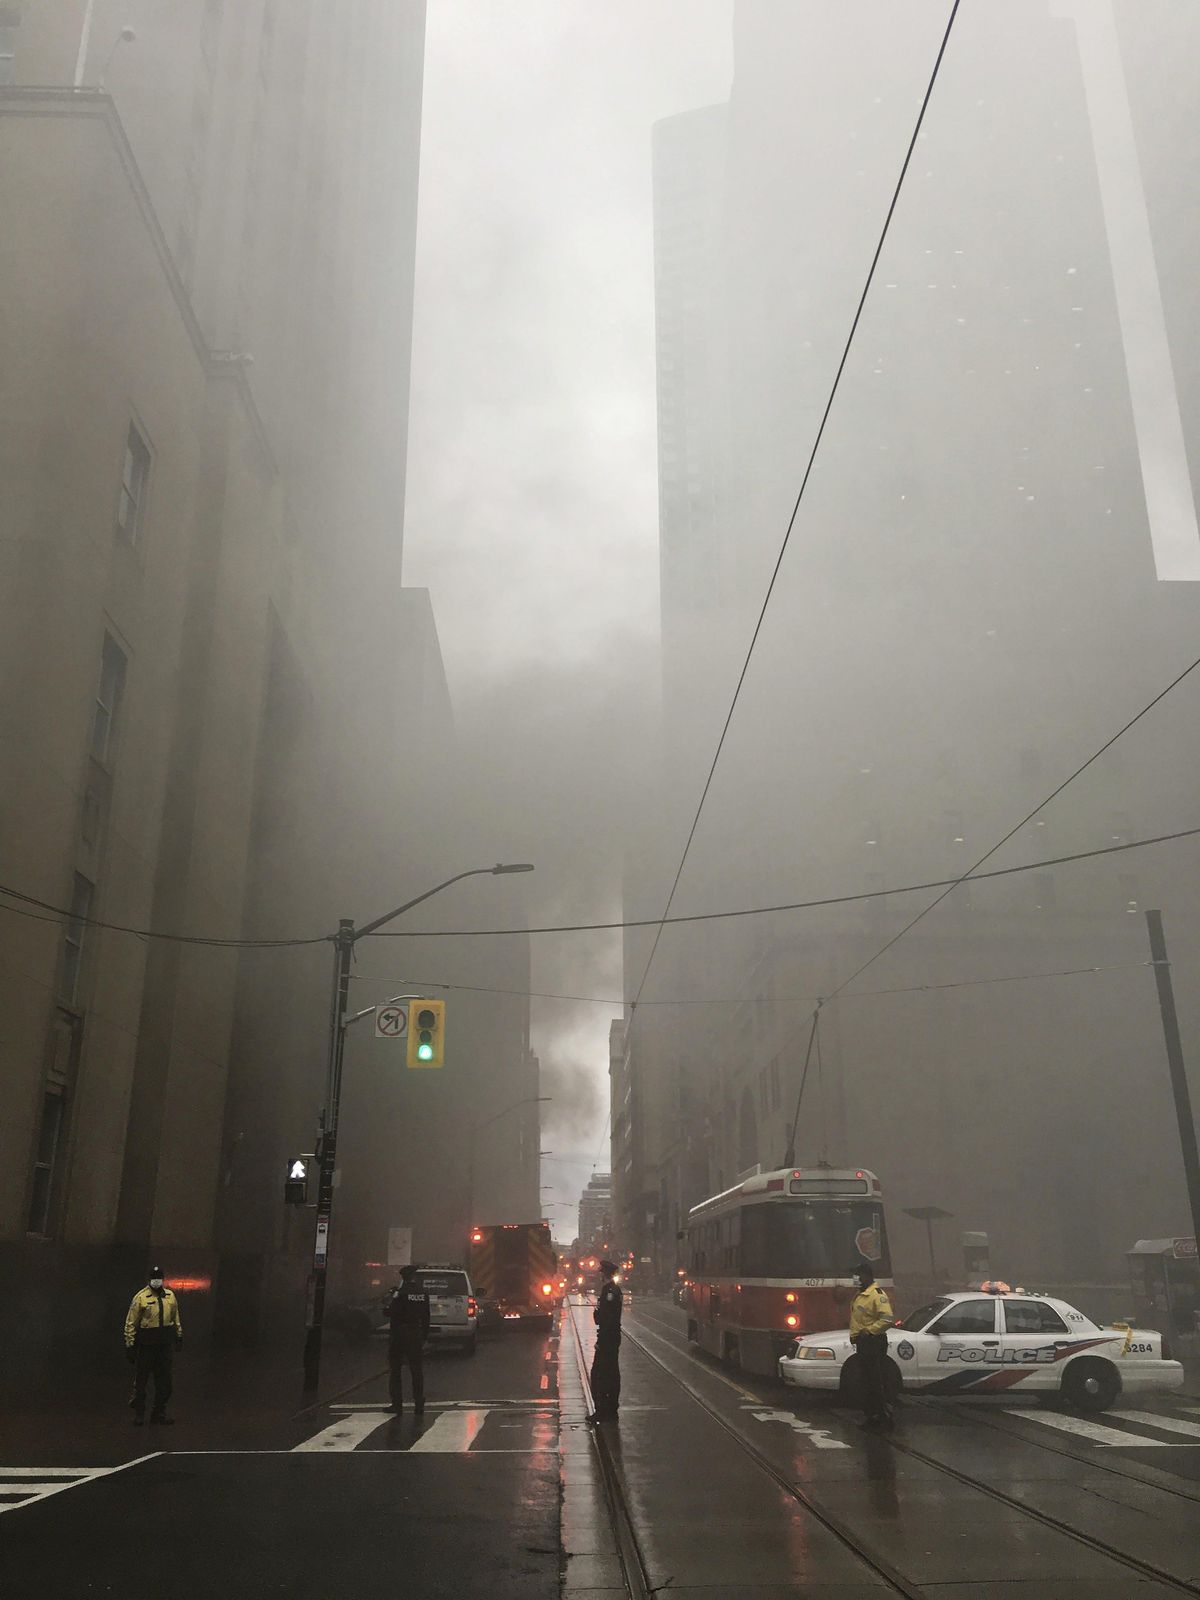 Police block the street as smoke pours into the air following a series of loud blasts were heard in Toronto on Monday, May 1, 2017. (Graeme Roy / The Canadian Press)